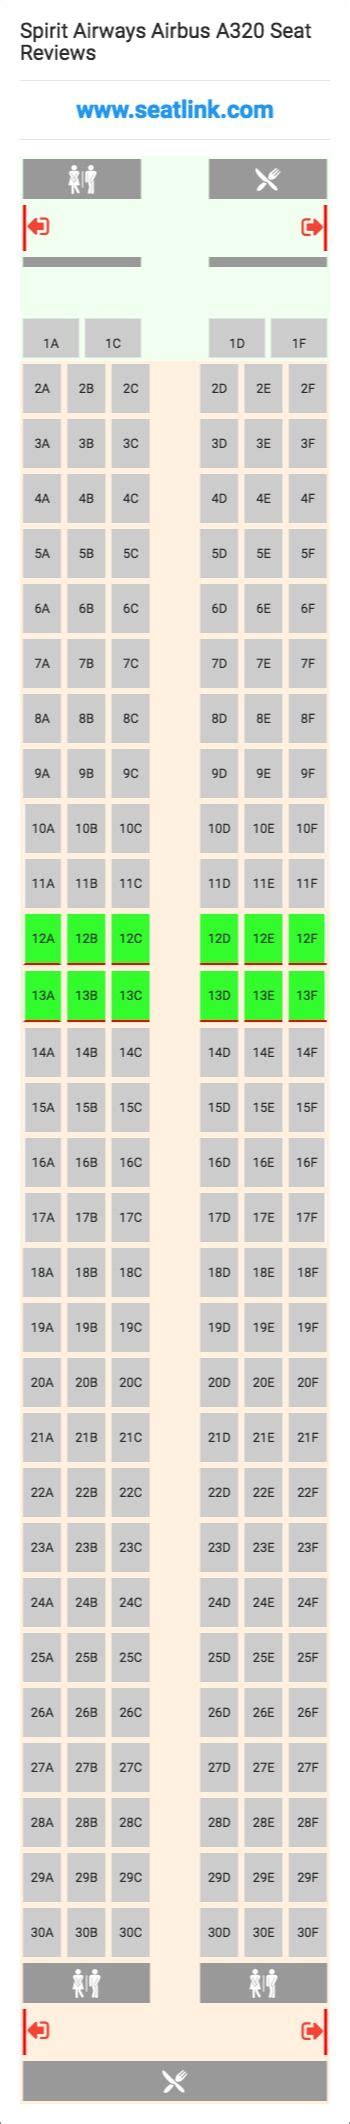 Seating Chart Spirit Airlines